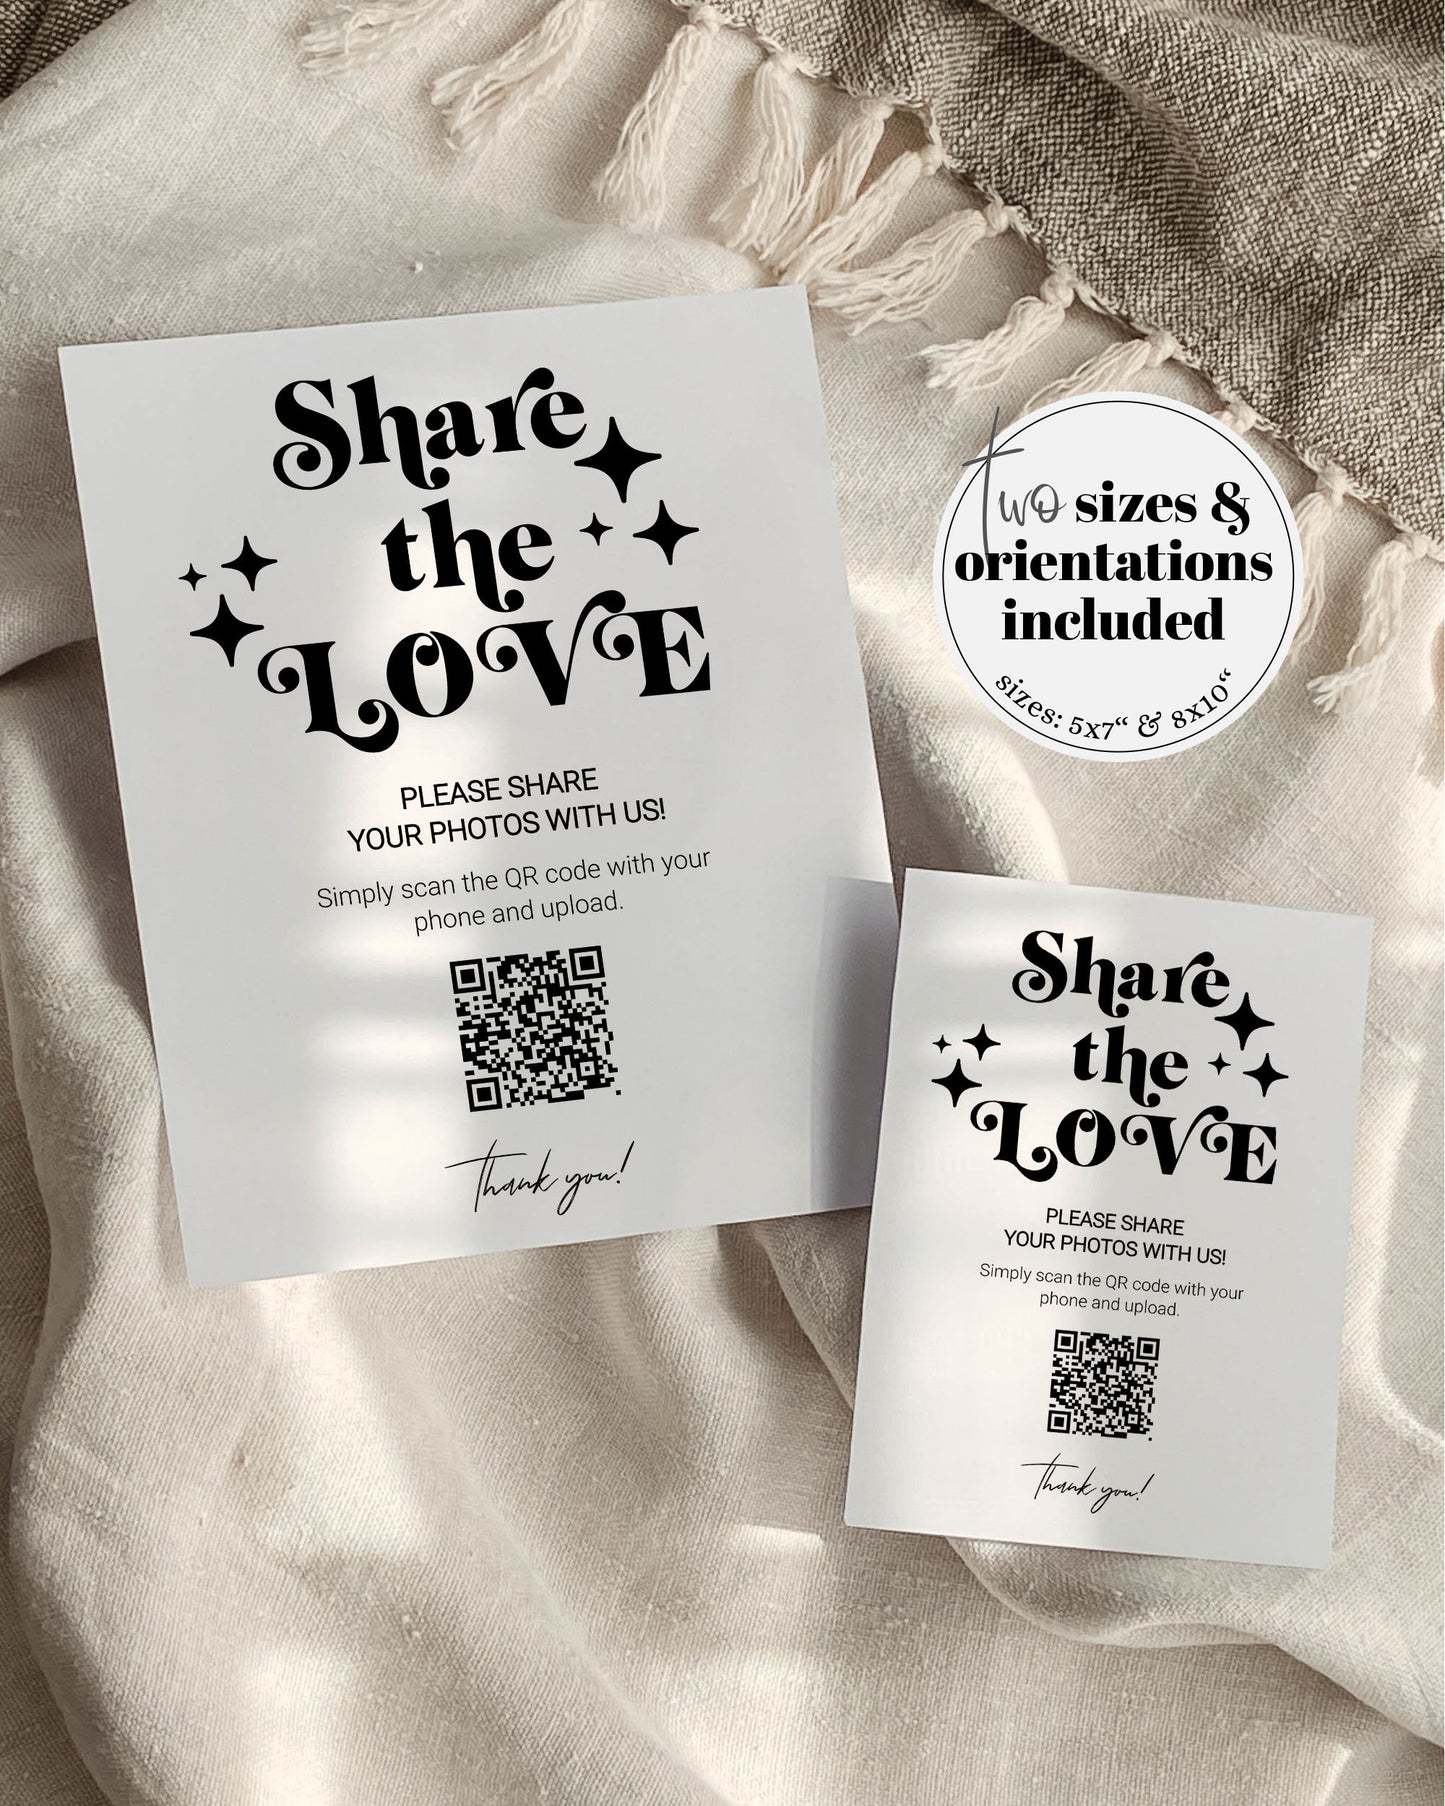 QR Code Sign "Share the Love" for 70s themed retro Wedding | Capture the Love | Share Photos Wedding Decor Sign | Printable Template #065b